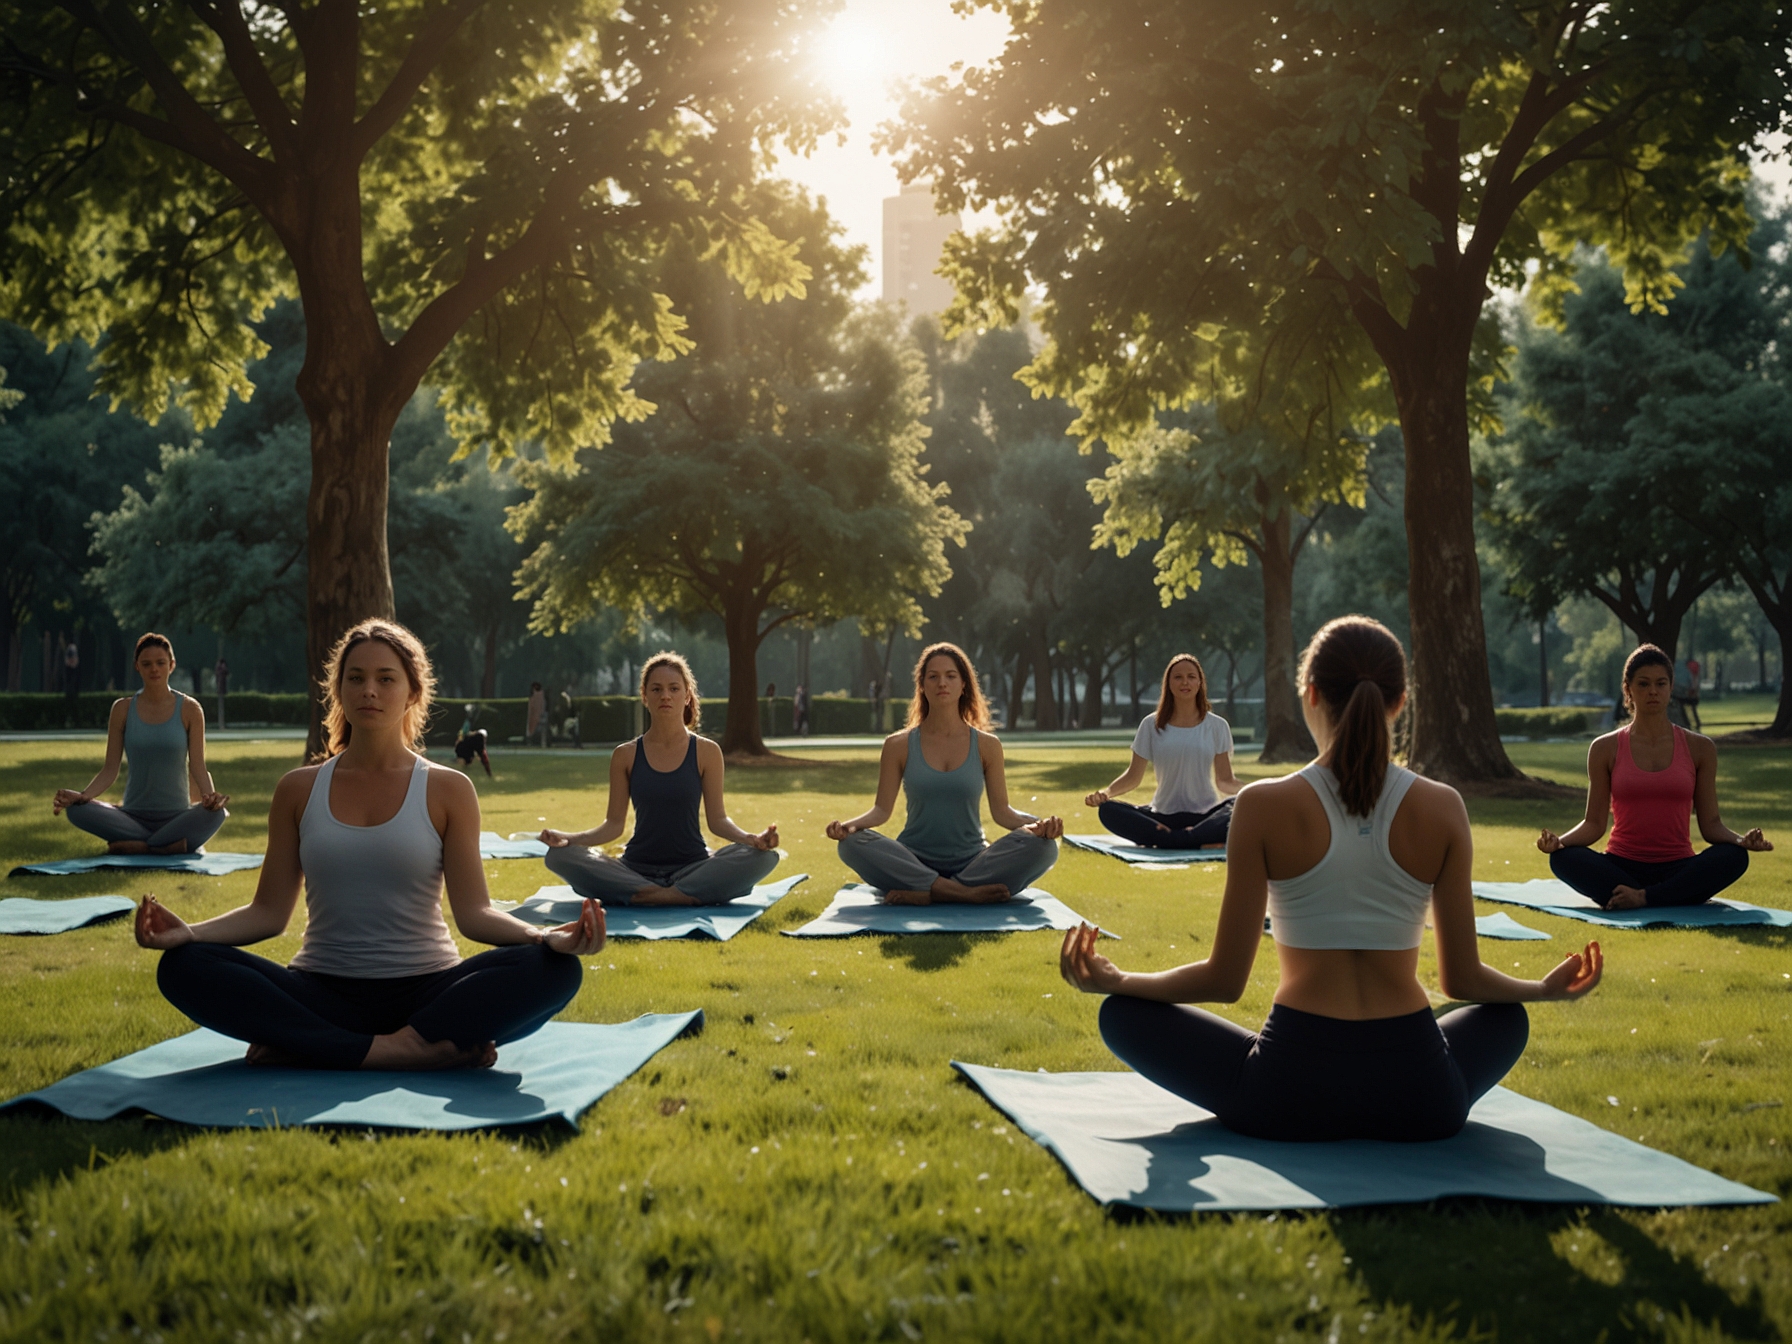 A group of people practicing yoga in a park, highlighting the importance of physical activity for mental health. The serene environment reflects a sense of peace and well-being.